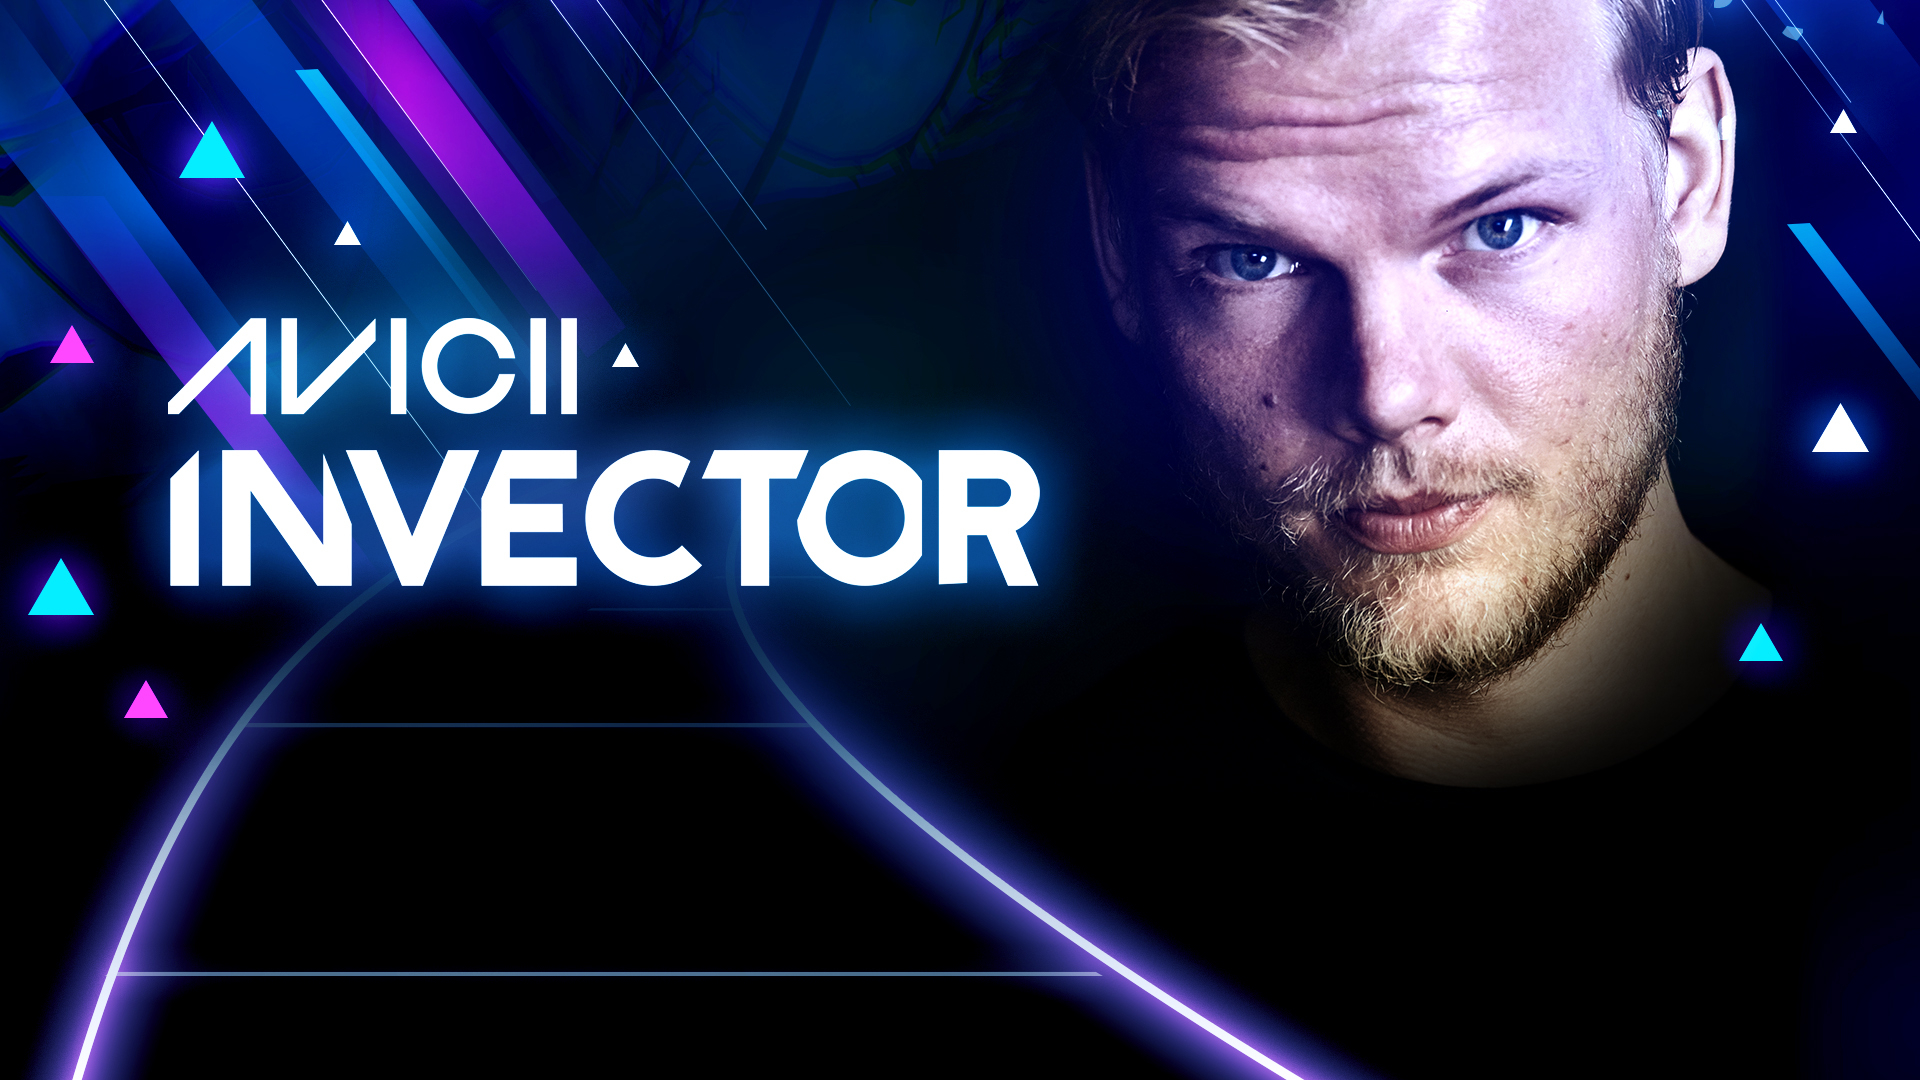 Perhaps one of the greatest Avicii tributes we have ever seen, , avicii without you